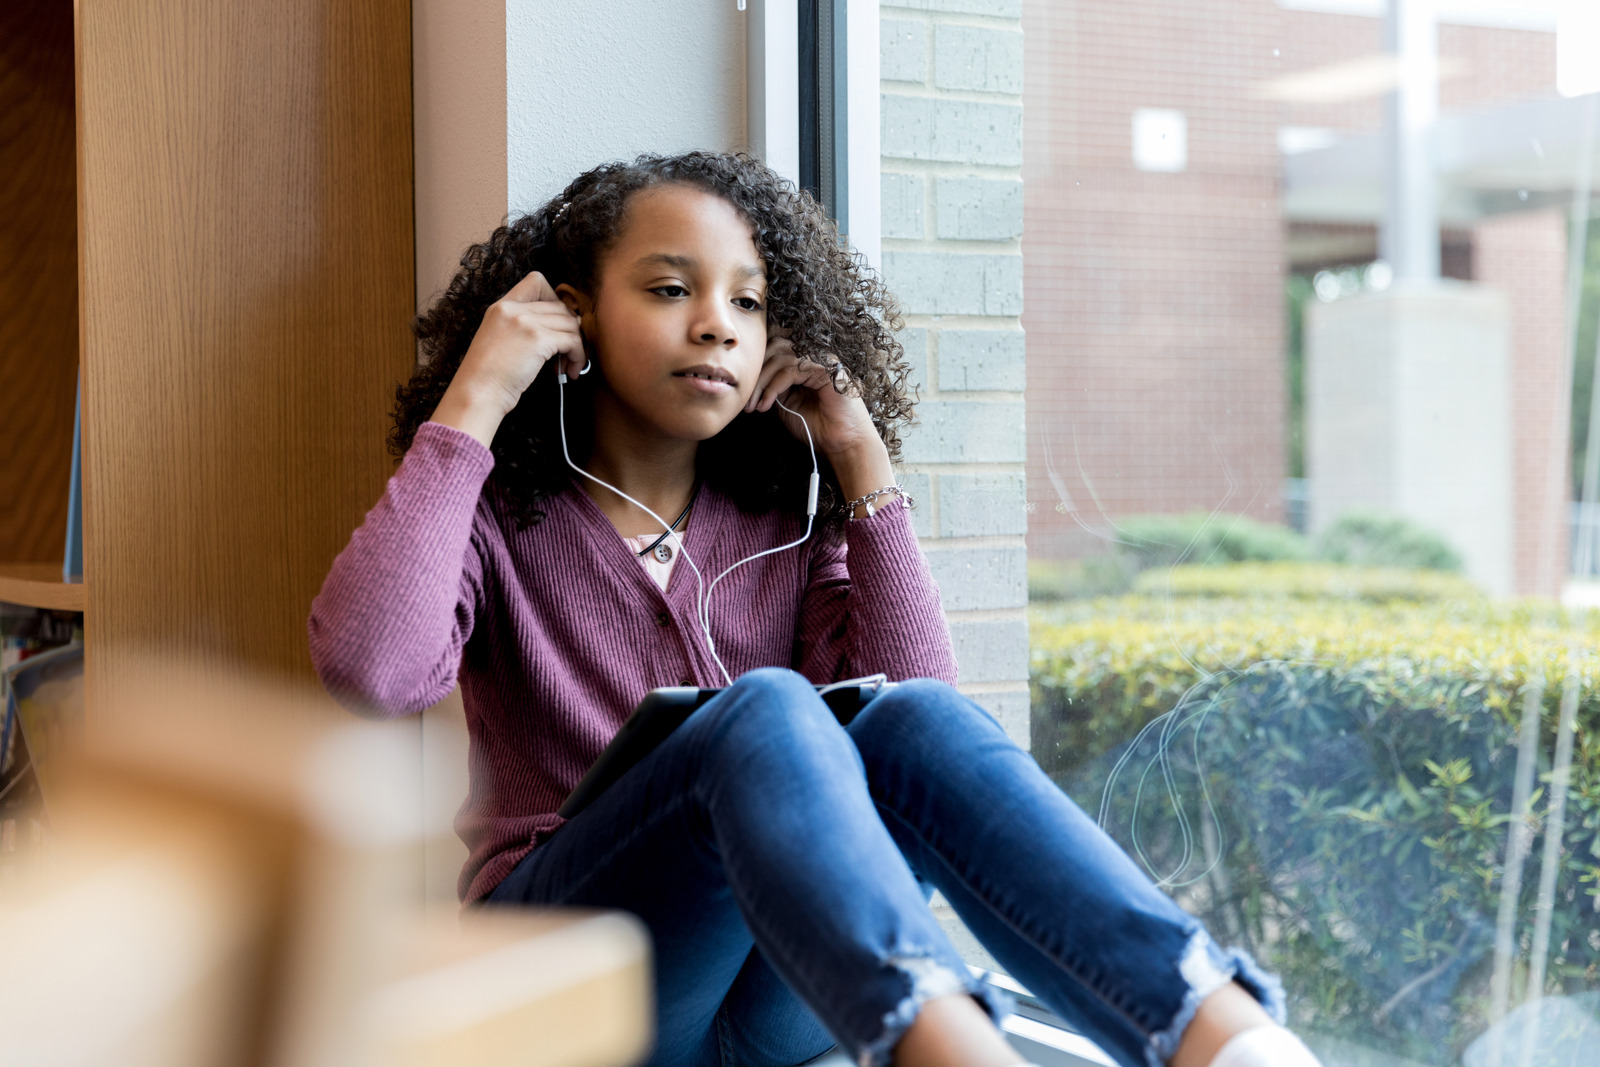 Taking a break from studying, the young sits on the library windowsill and adjusts her earbuds to listen to music on her digital tablet.